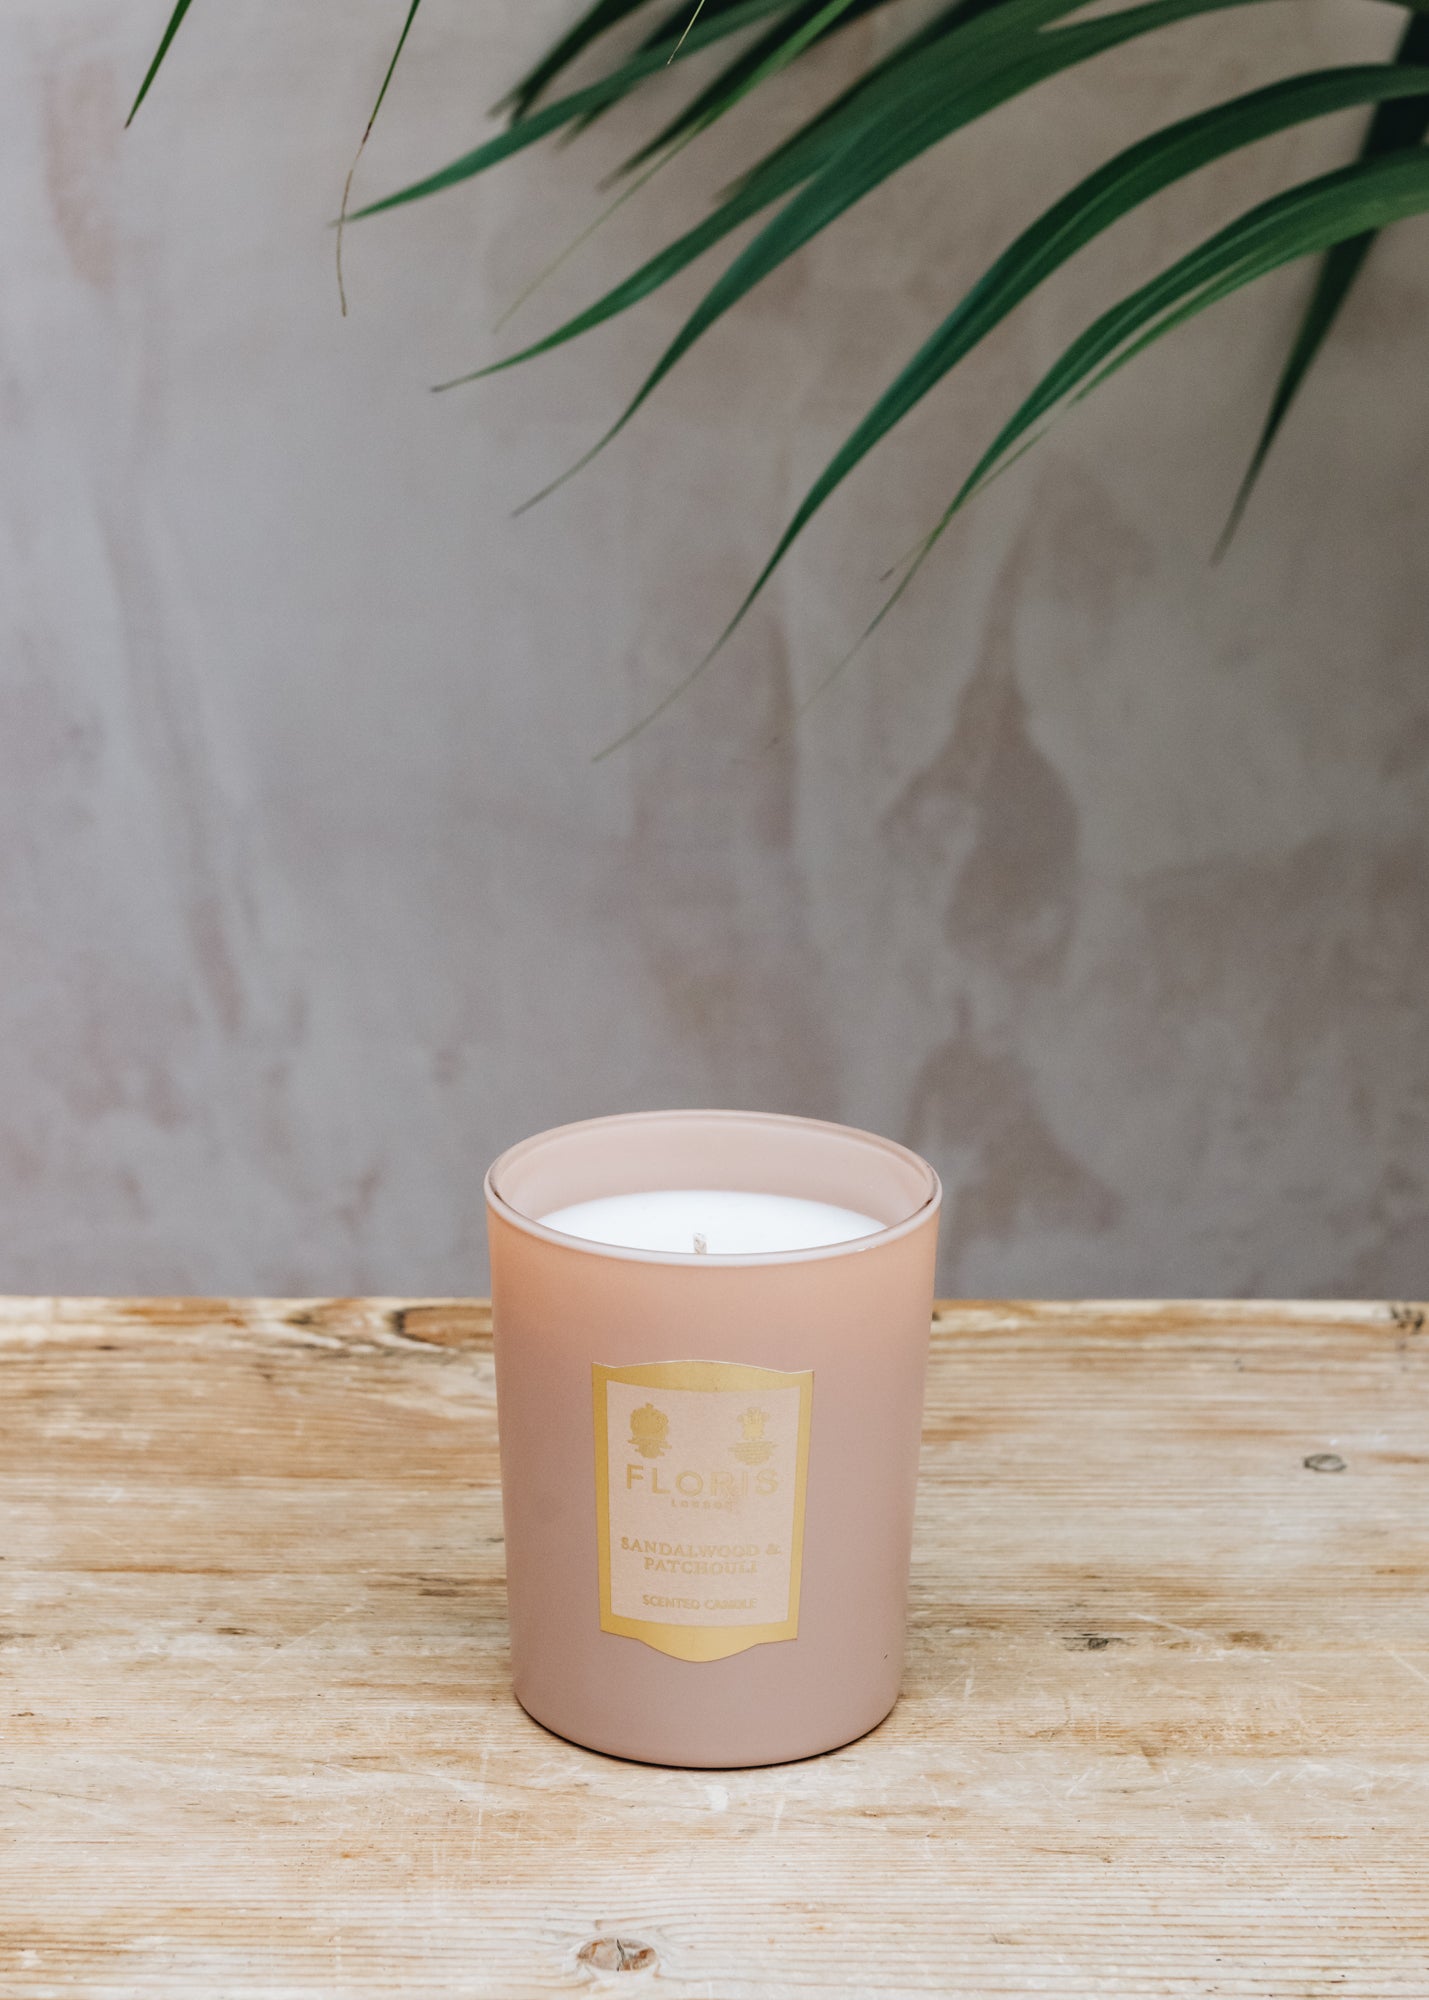 Floris Candle in Sandalwood and Patchouli